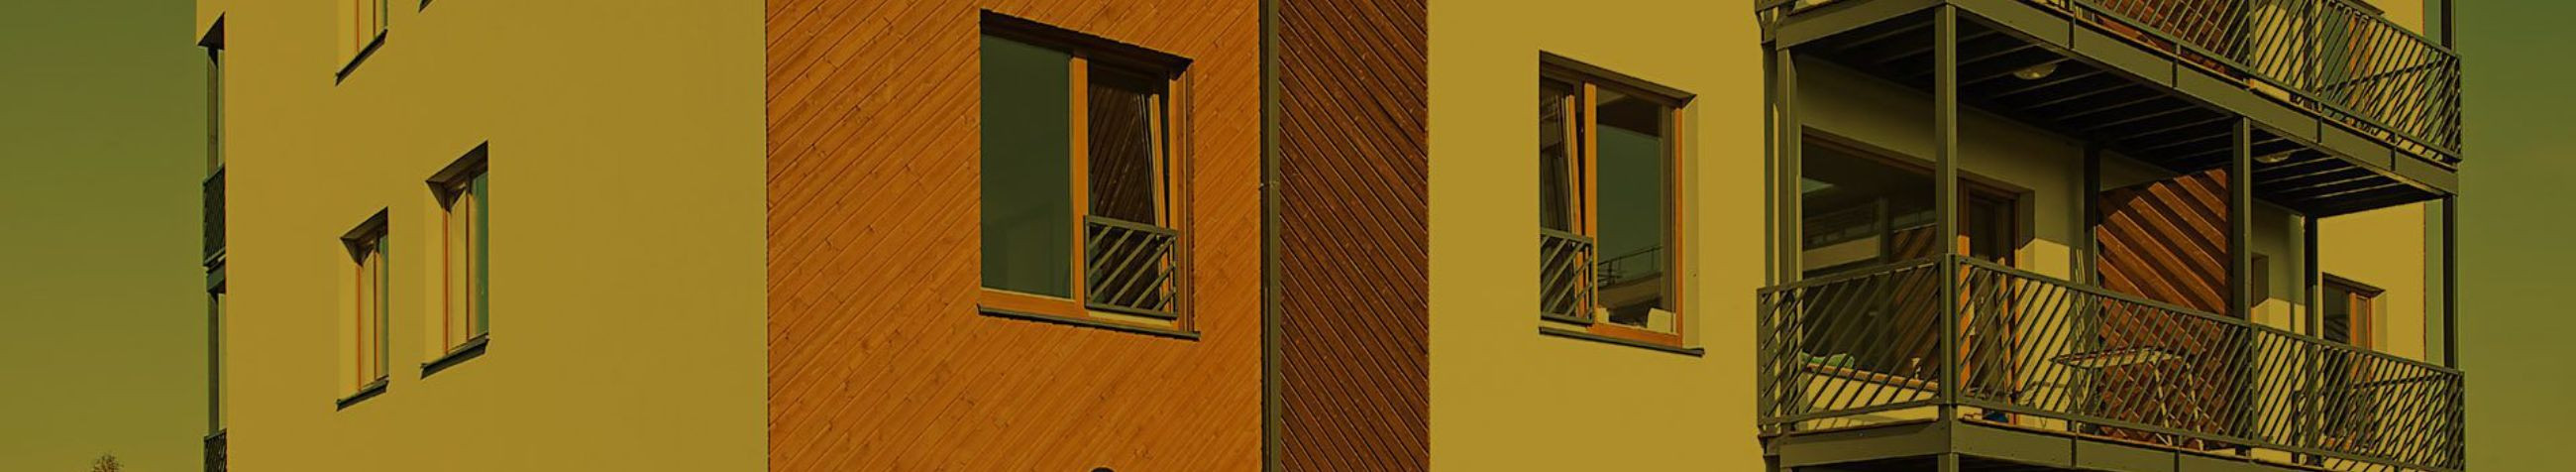 Wooden windows, Wooden aluminium windows, pvc windows, window accessories, wooden doors, wooden aluminium doors, pvc doors, door accessories, heat and noise resistance, inner and outer space opening fillings